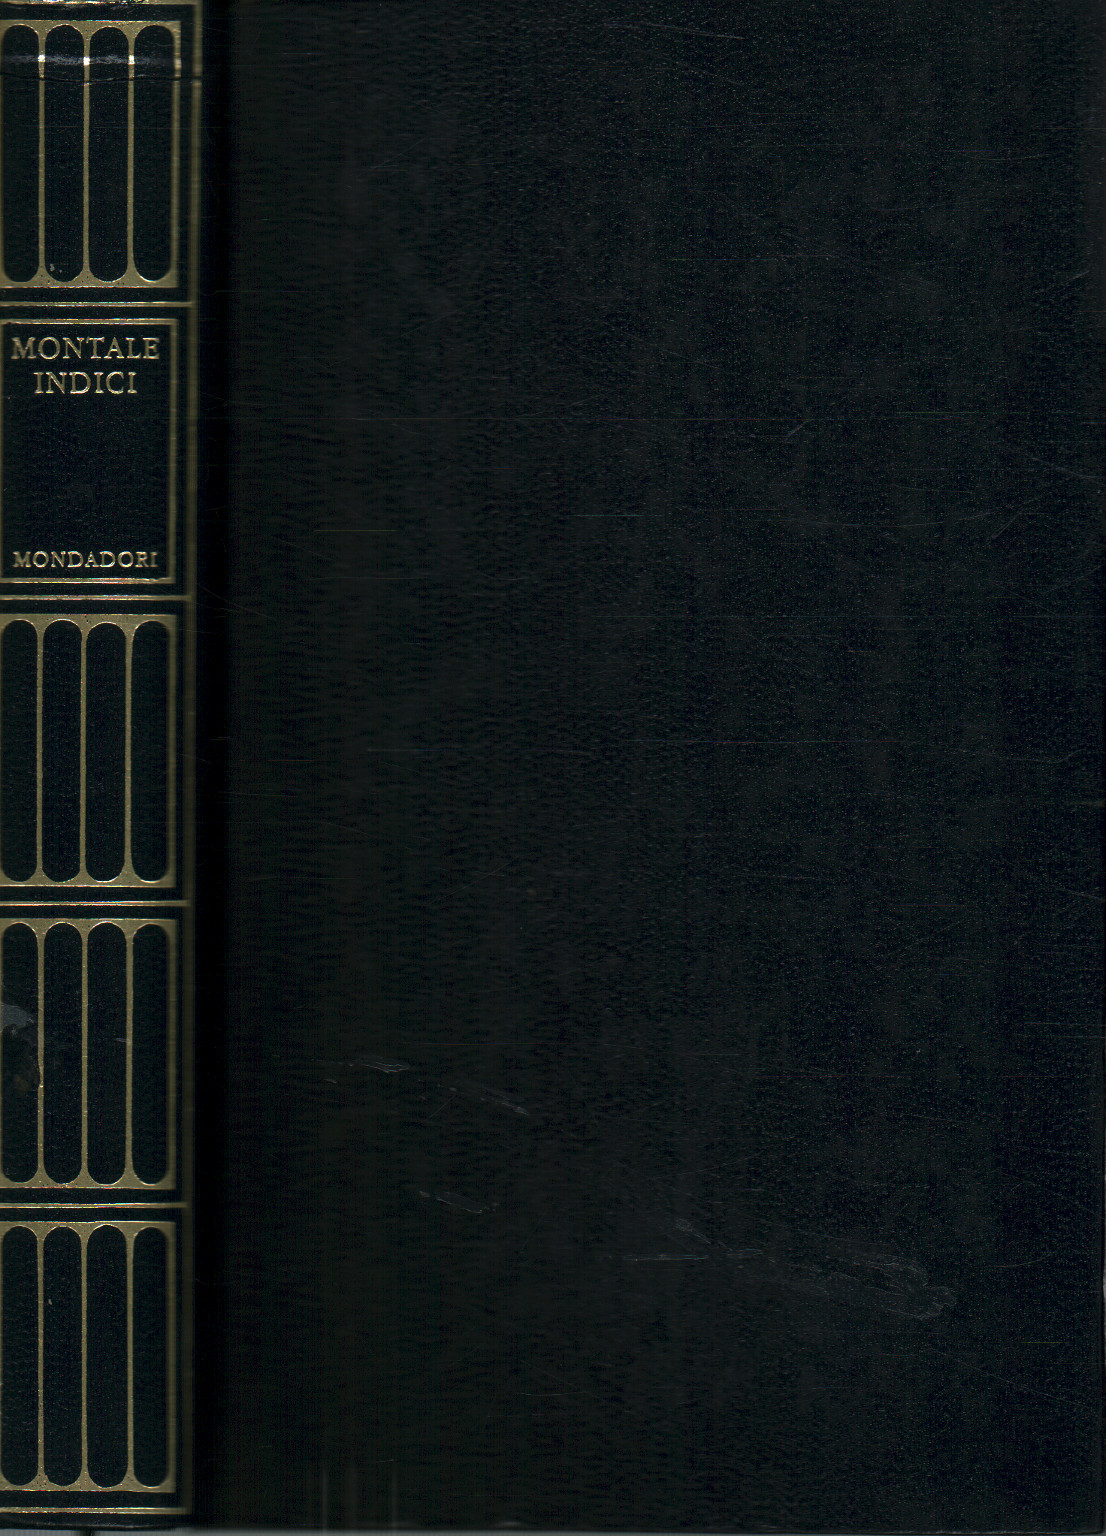 Index of the prose works, s.a.